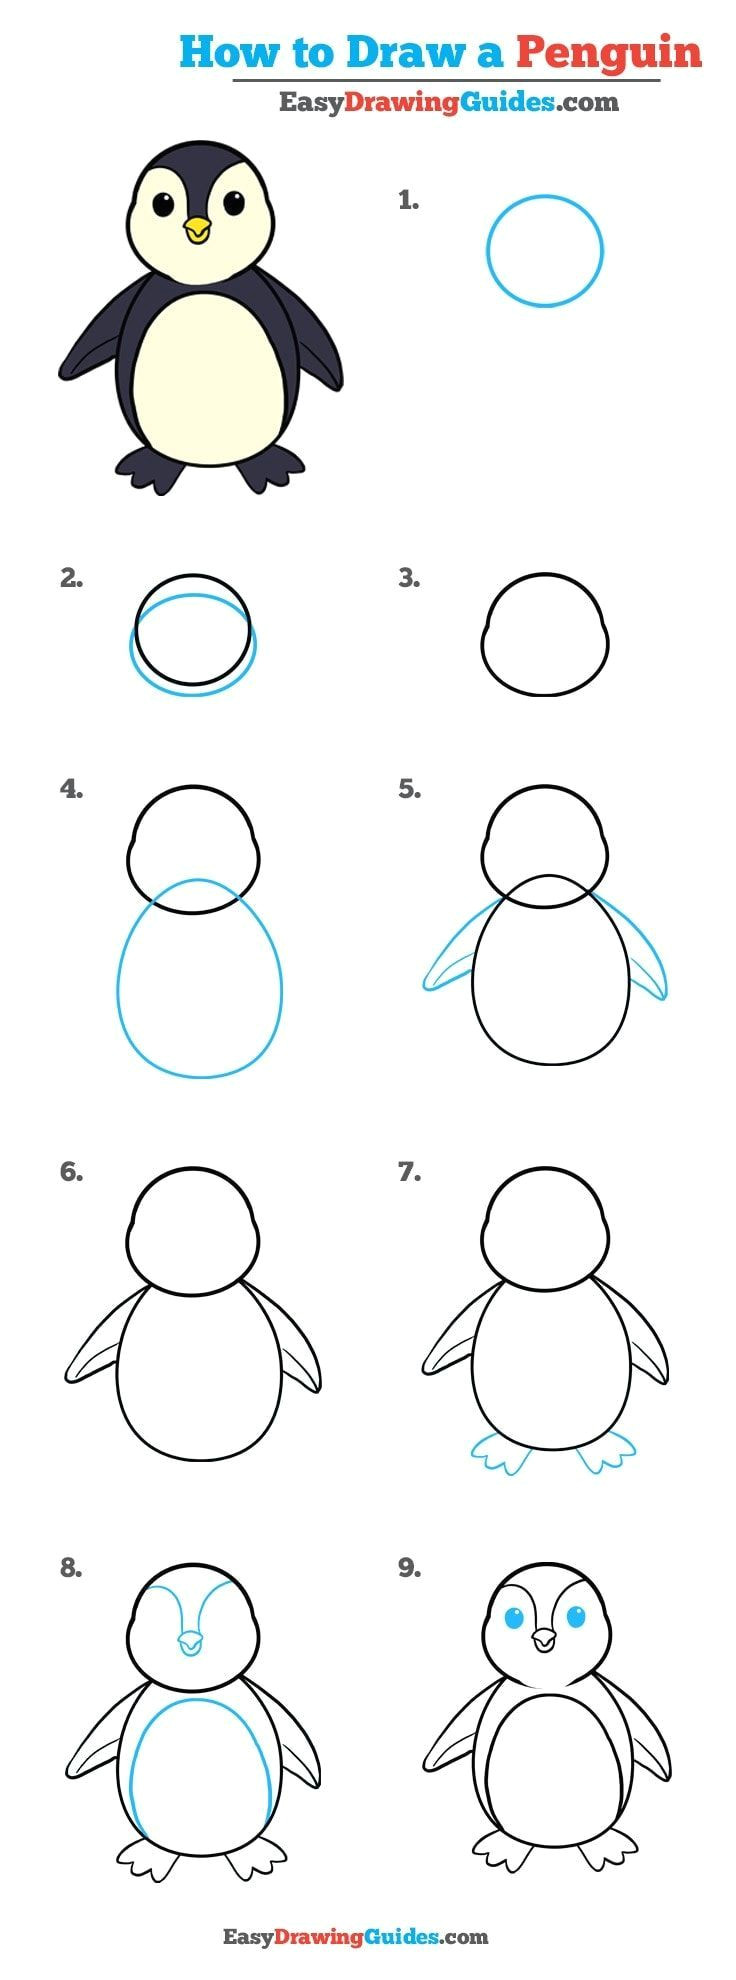 How to Draw An Easy Cartoon Penguin How to Draw A Penguin In A Few Easy Steps How to Draw